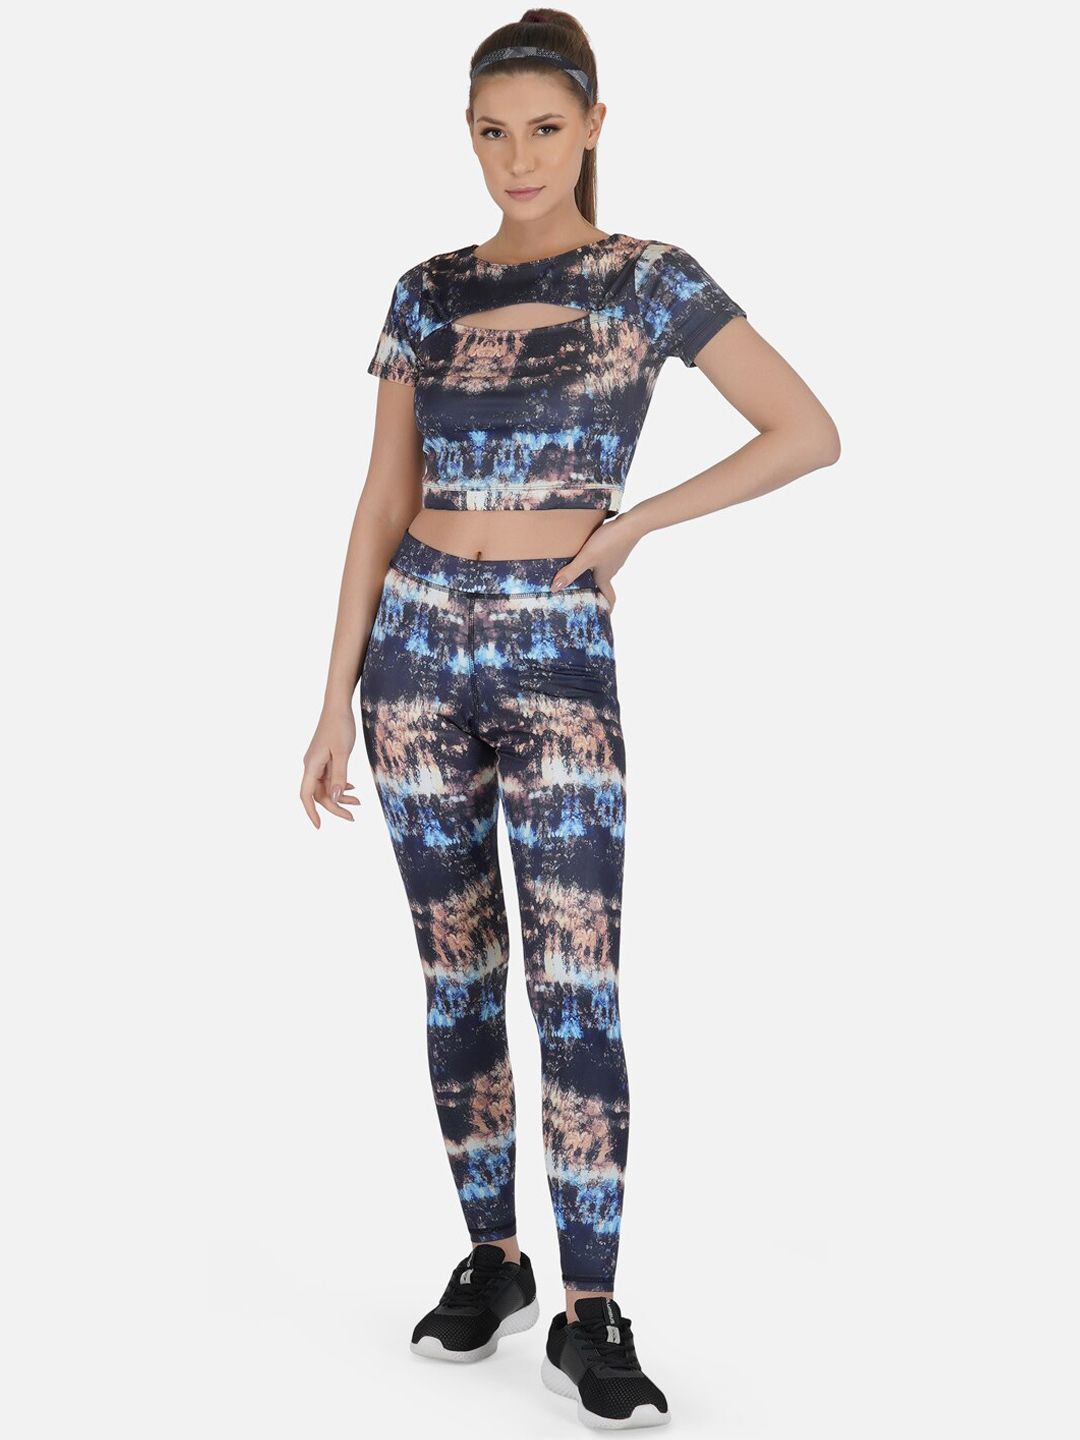 IMPERATIVE Women Black & Blue Abstract Printed Tracksuit Price in India